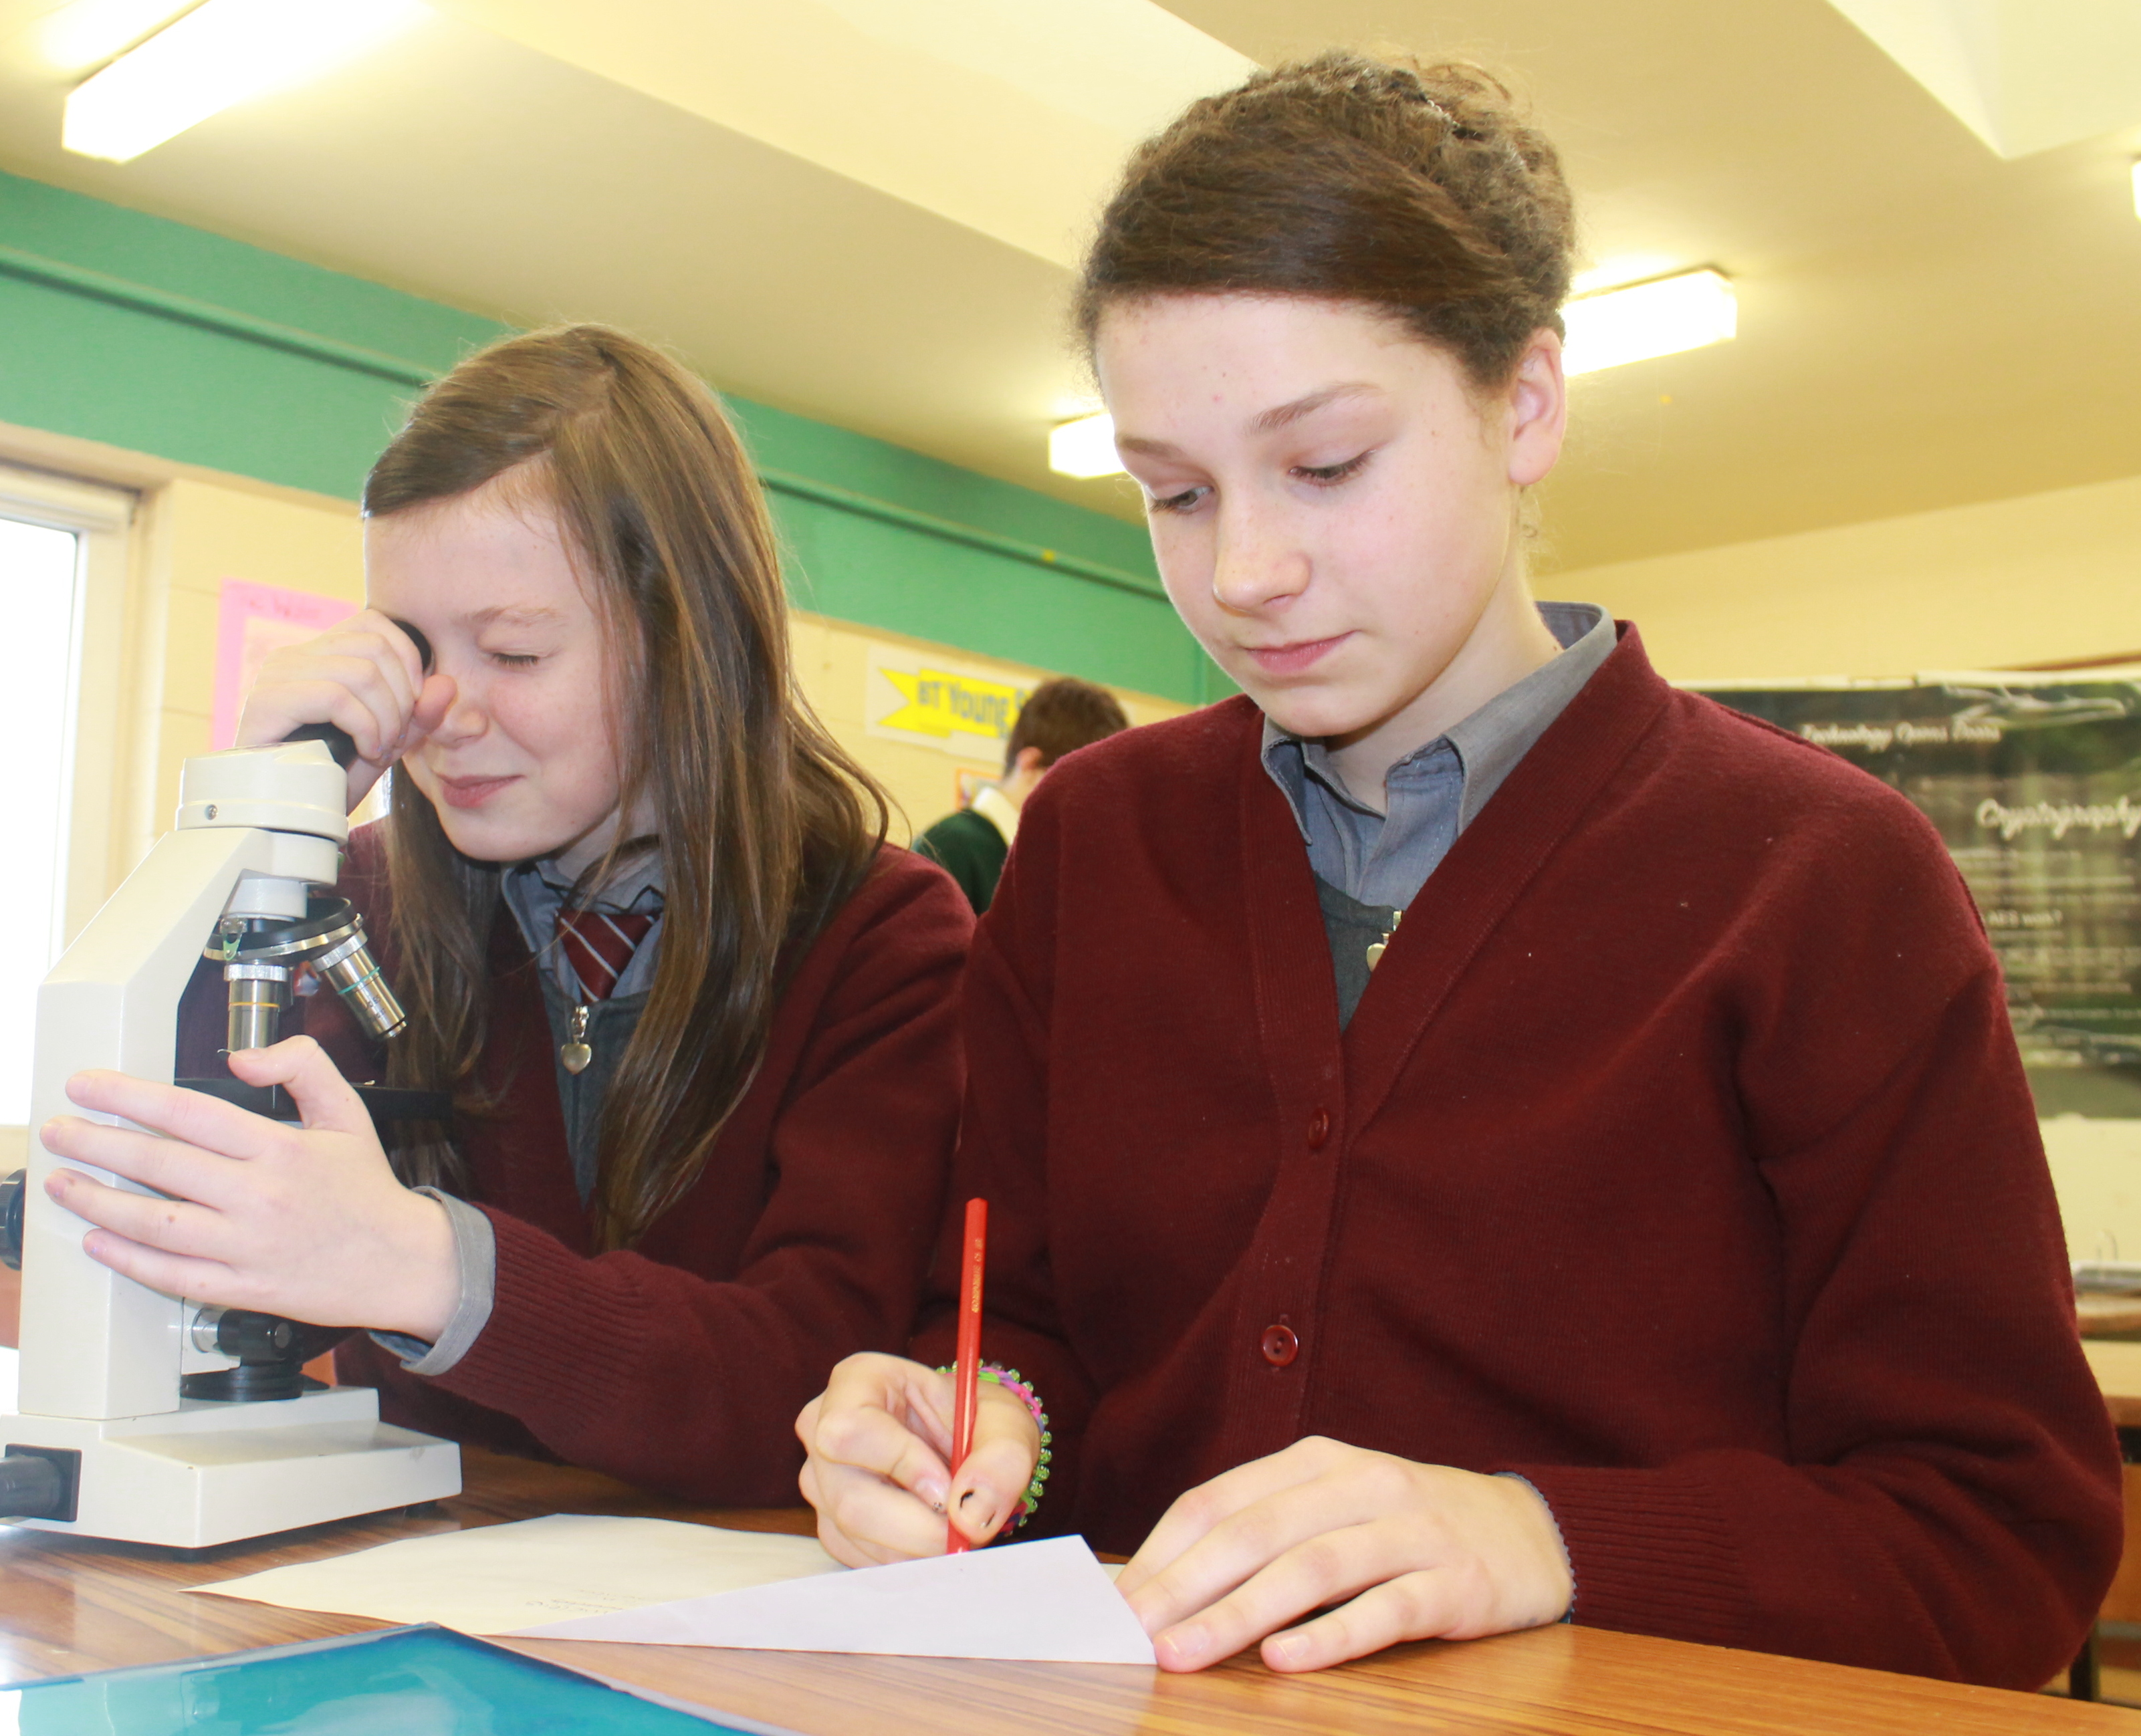 Girls from Breaffy National School, Castlebar examine plant cells during Science & Technology Week at Davitt College. This was just one in a range of Science Experiments and Computer Programming events that took place over the four day science and technology event.